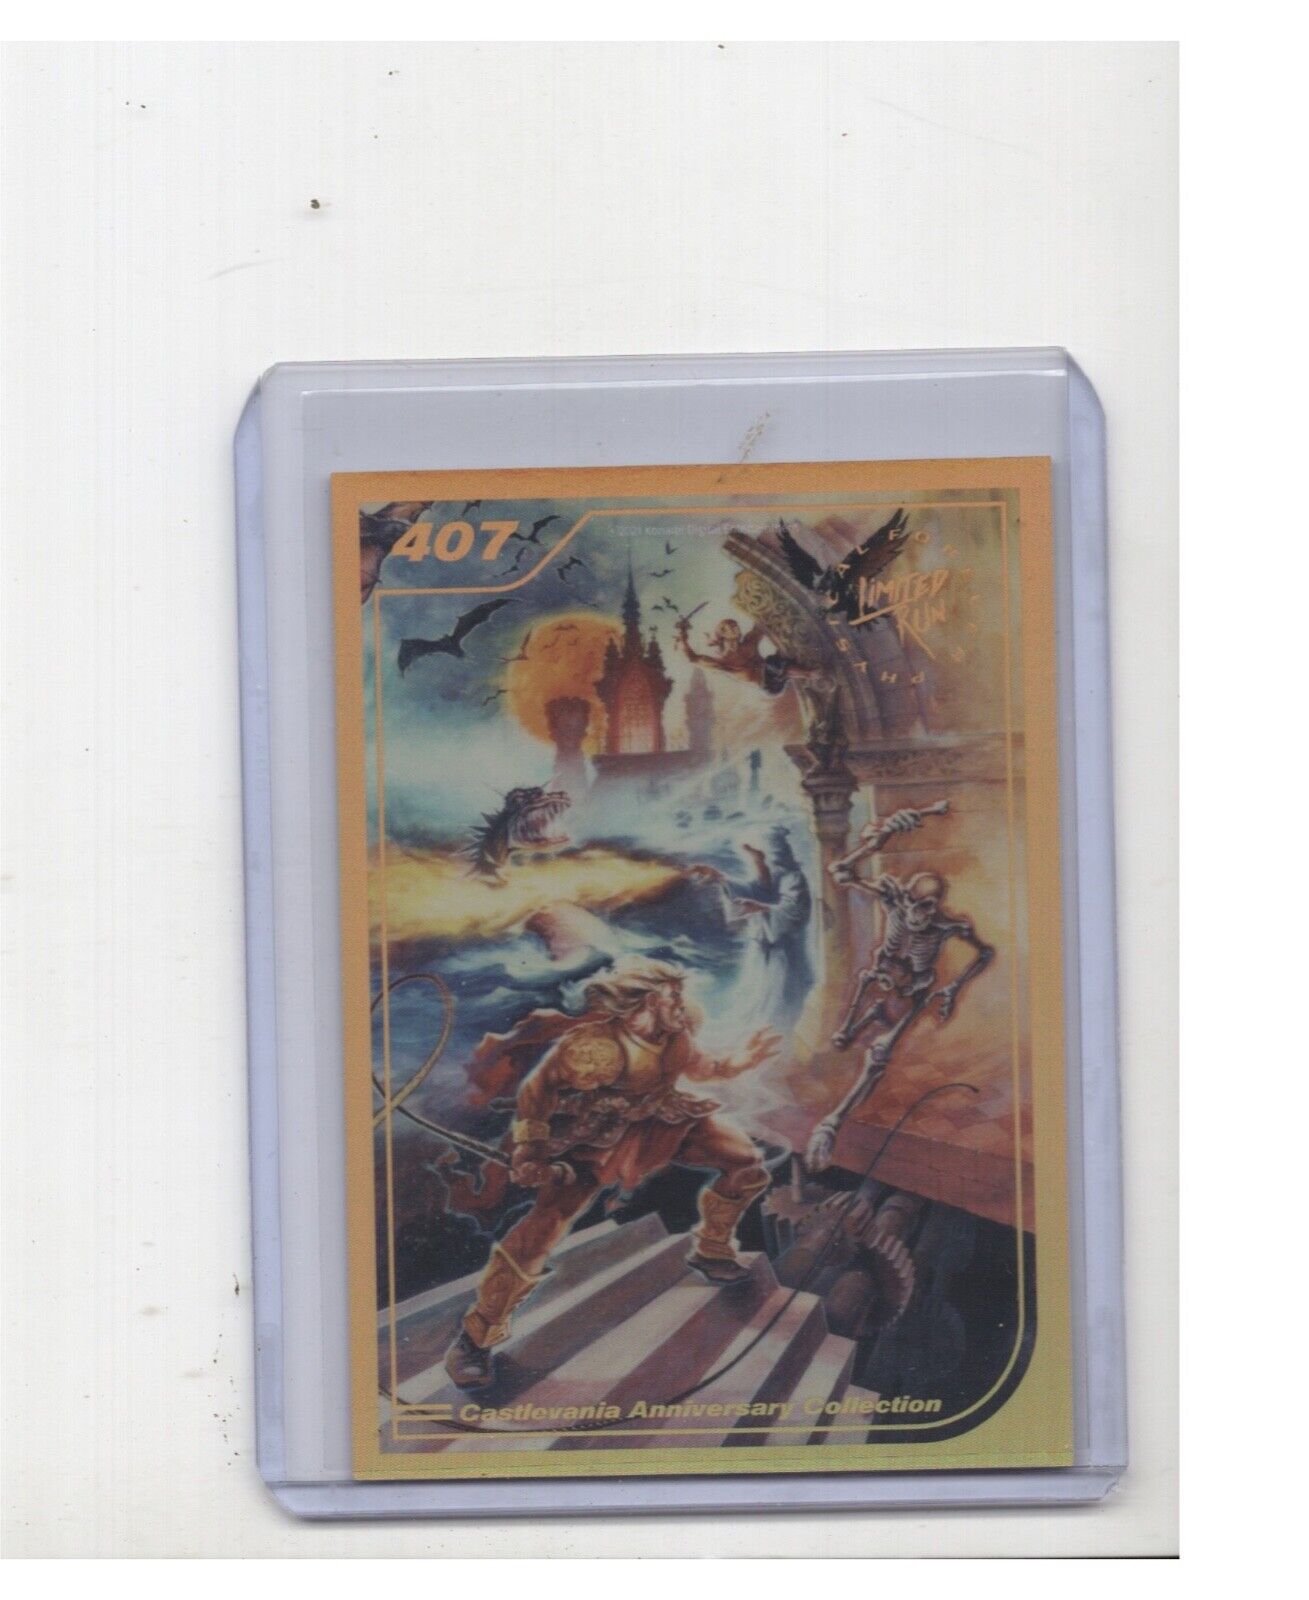 Castlevania Anniversary Collection 407 Limited Run Card Gold Border Trading